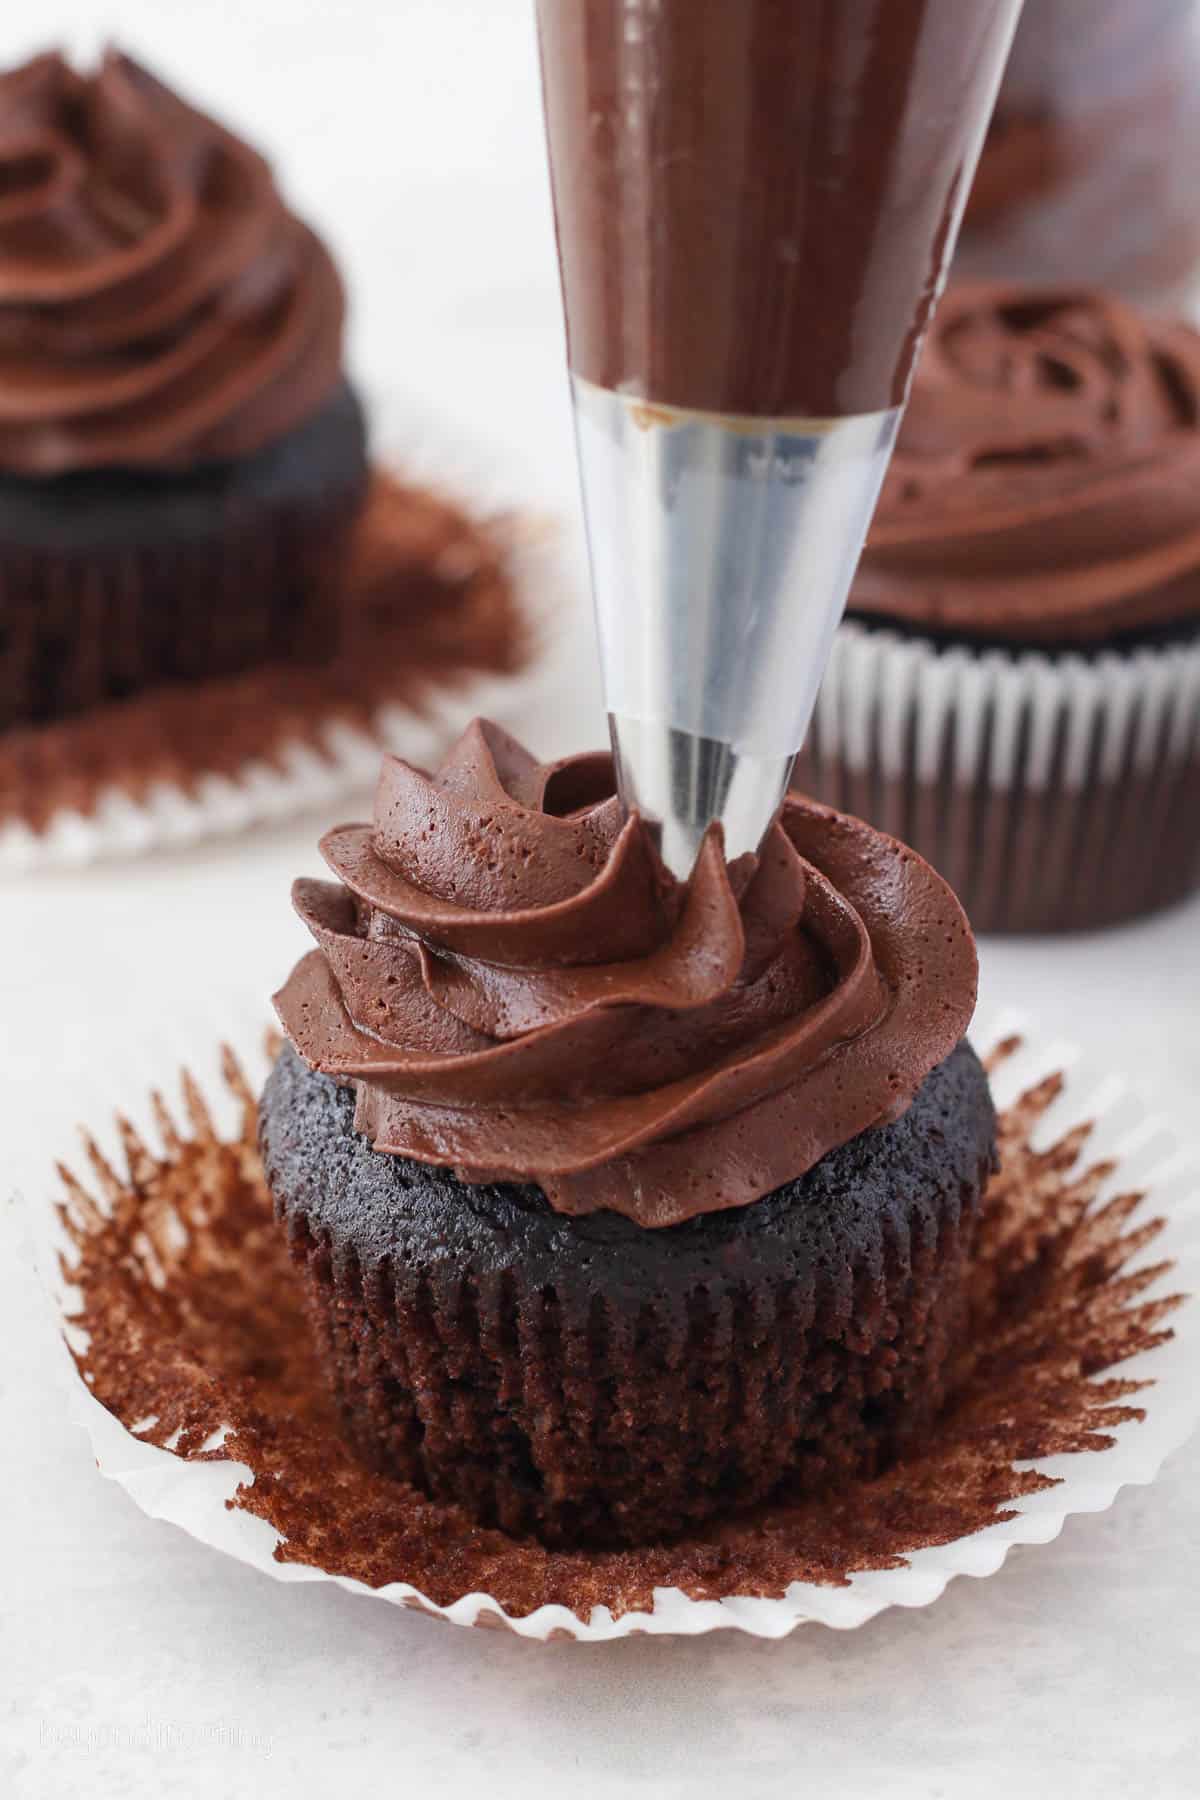 A piping tip pipes a swirl of chocolate ganache frosting onto a chocolate cupcake, with more frosted cupcakes in the background.